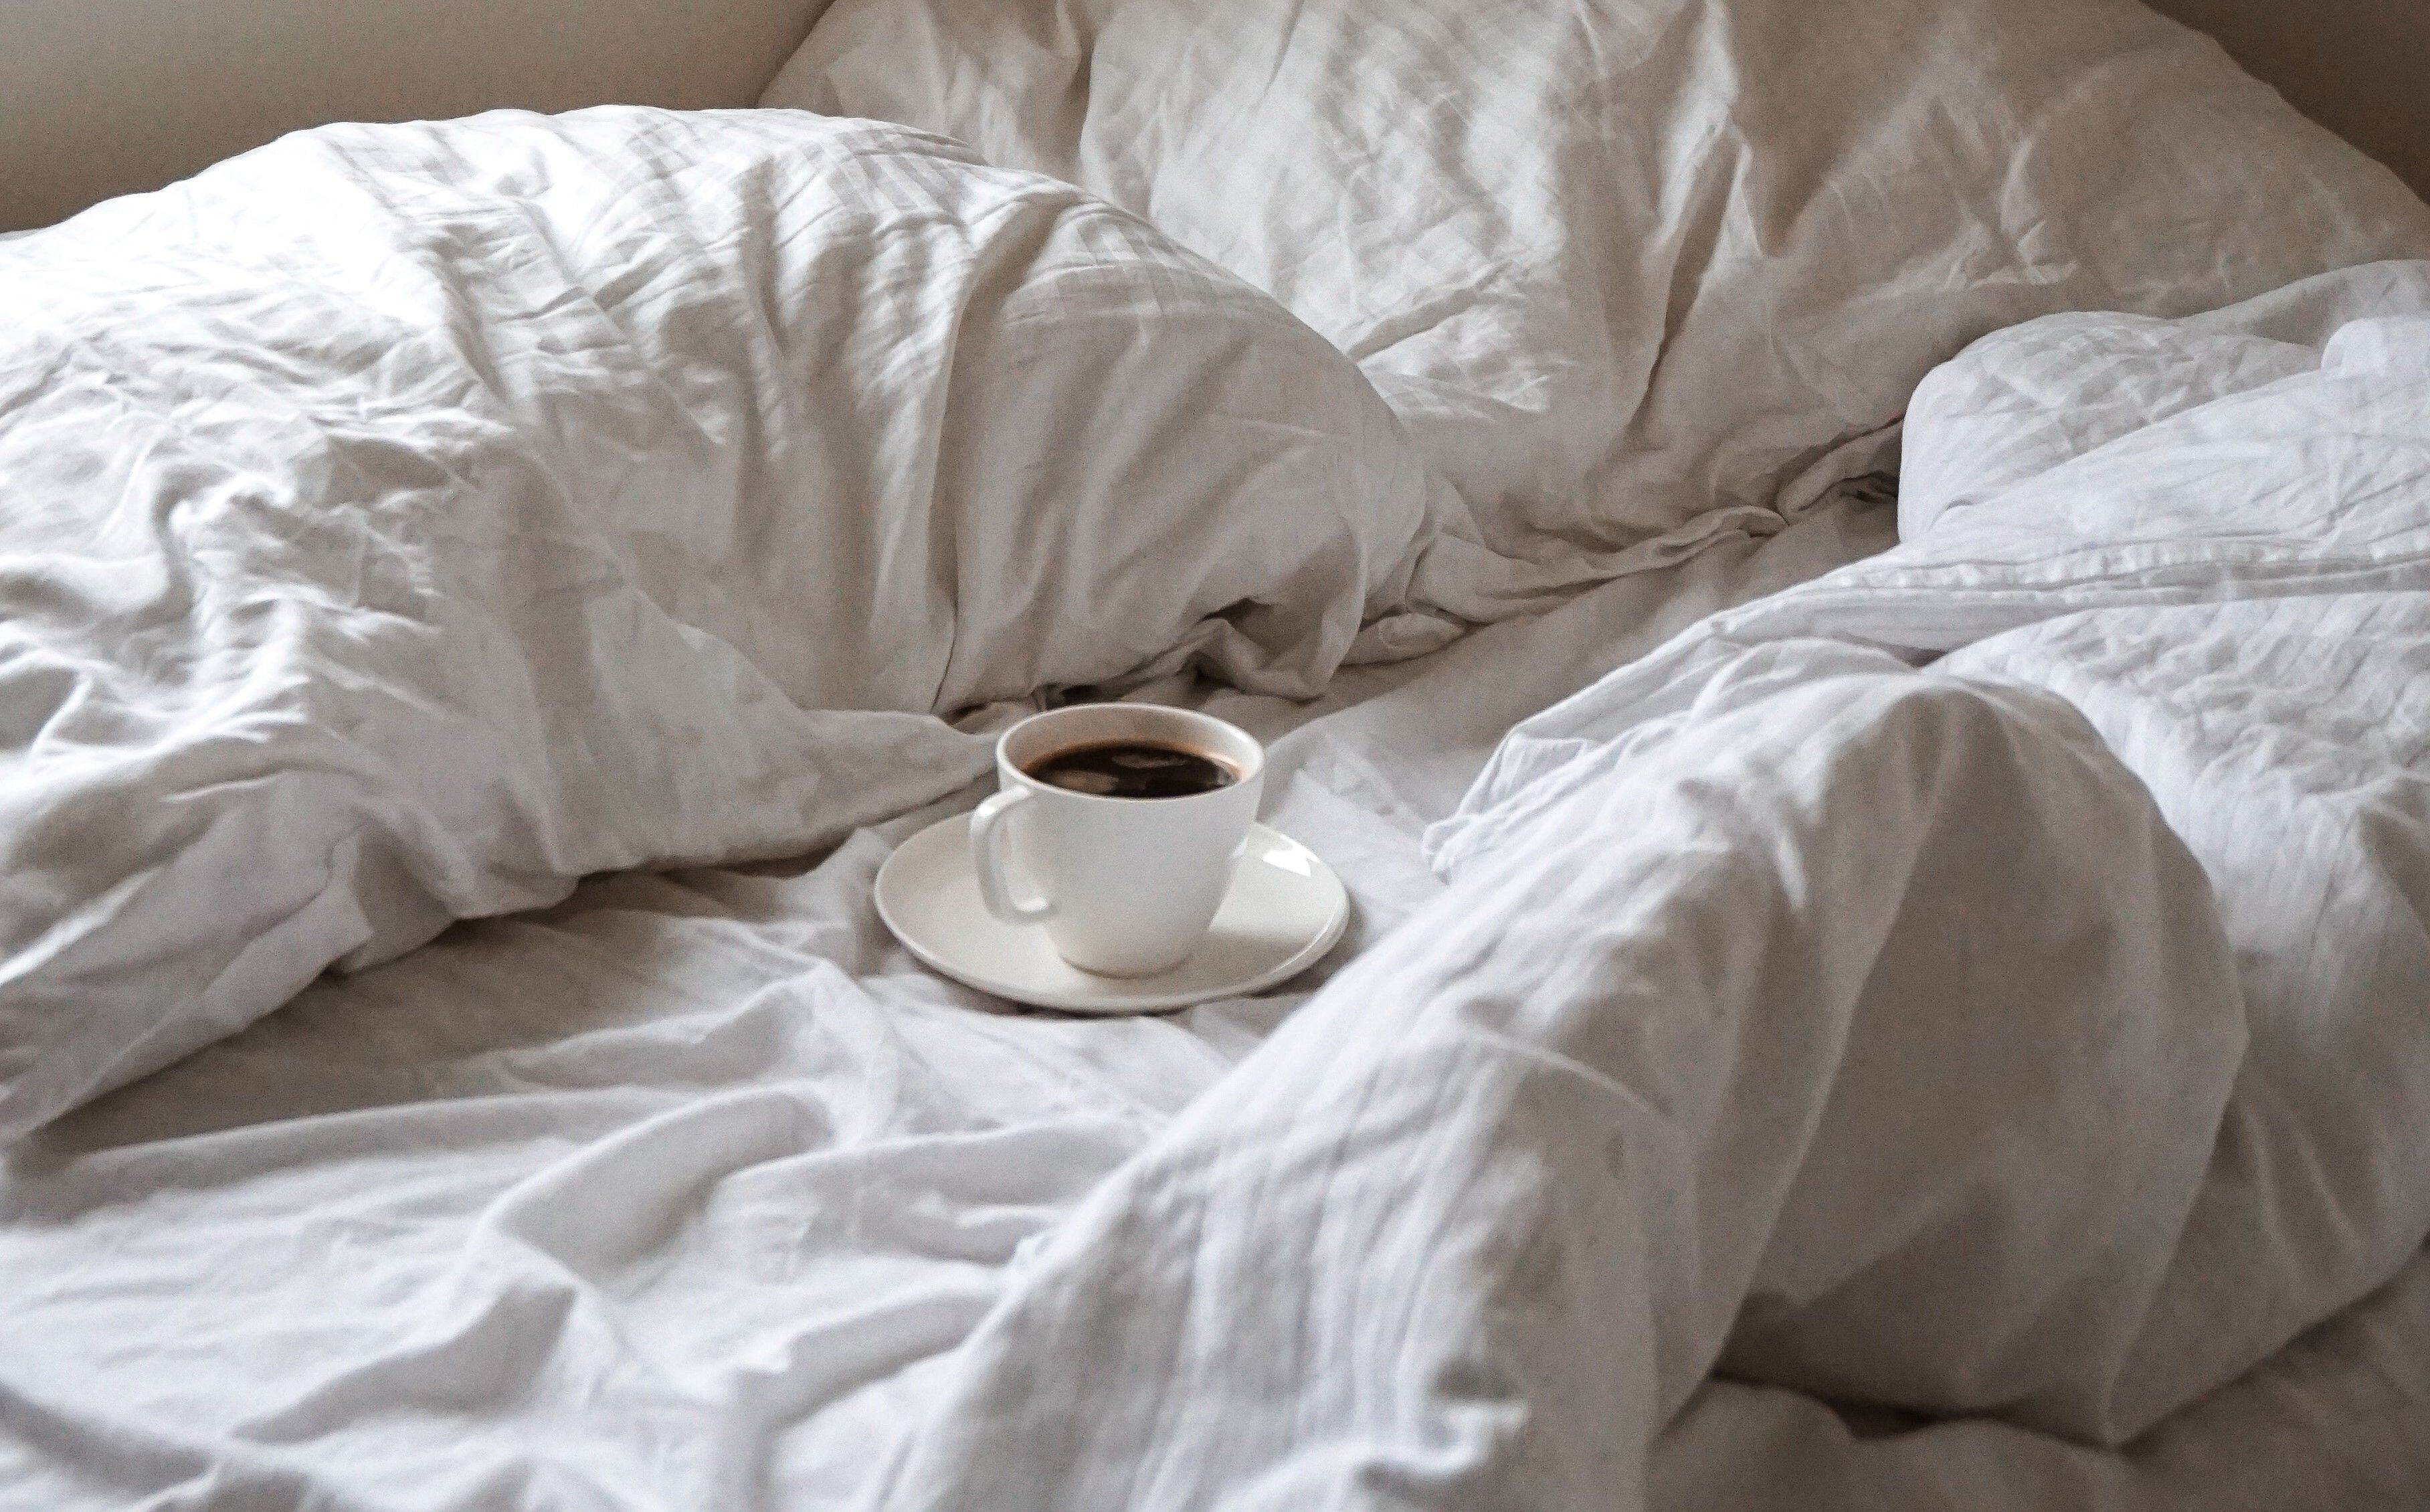 A cup of coffee in an unmade bed.